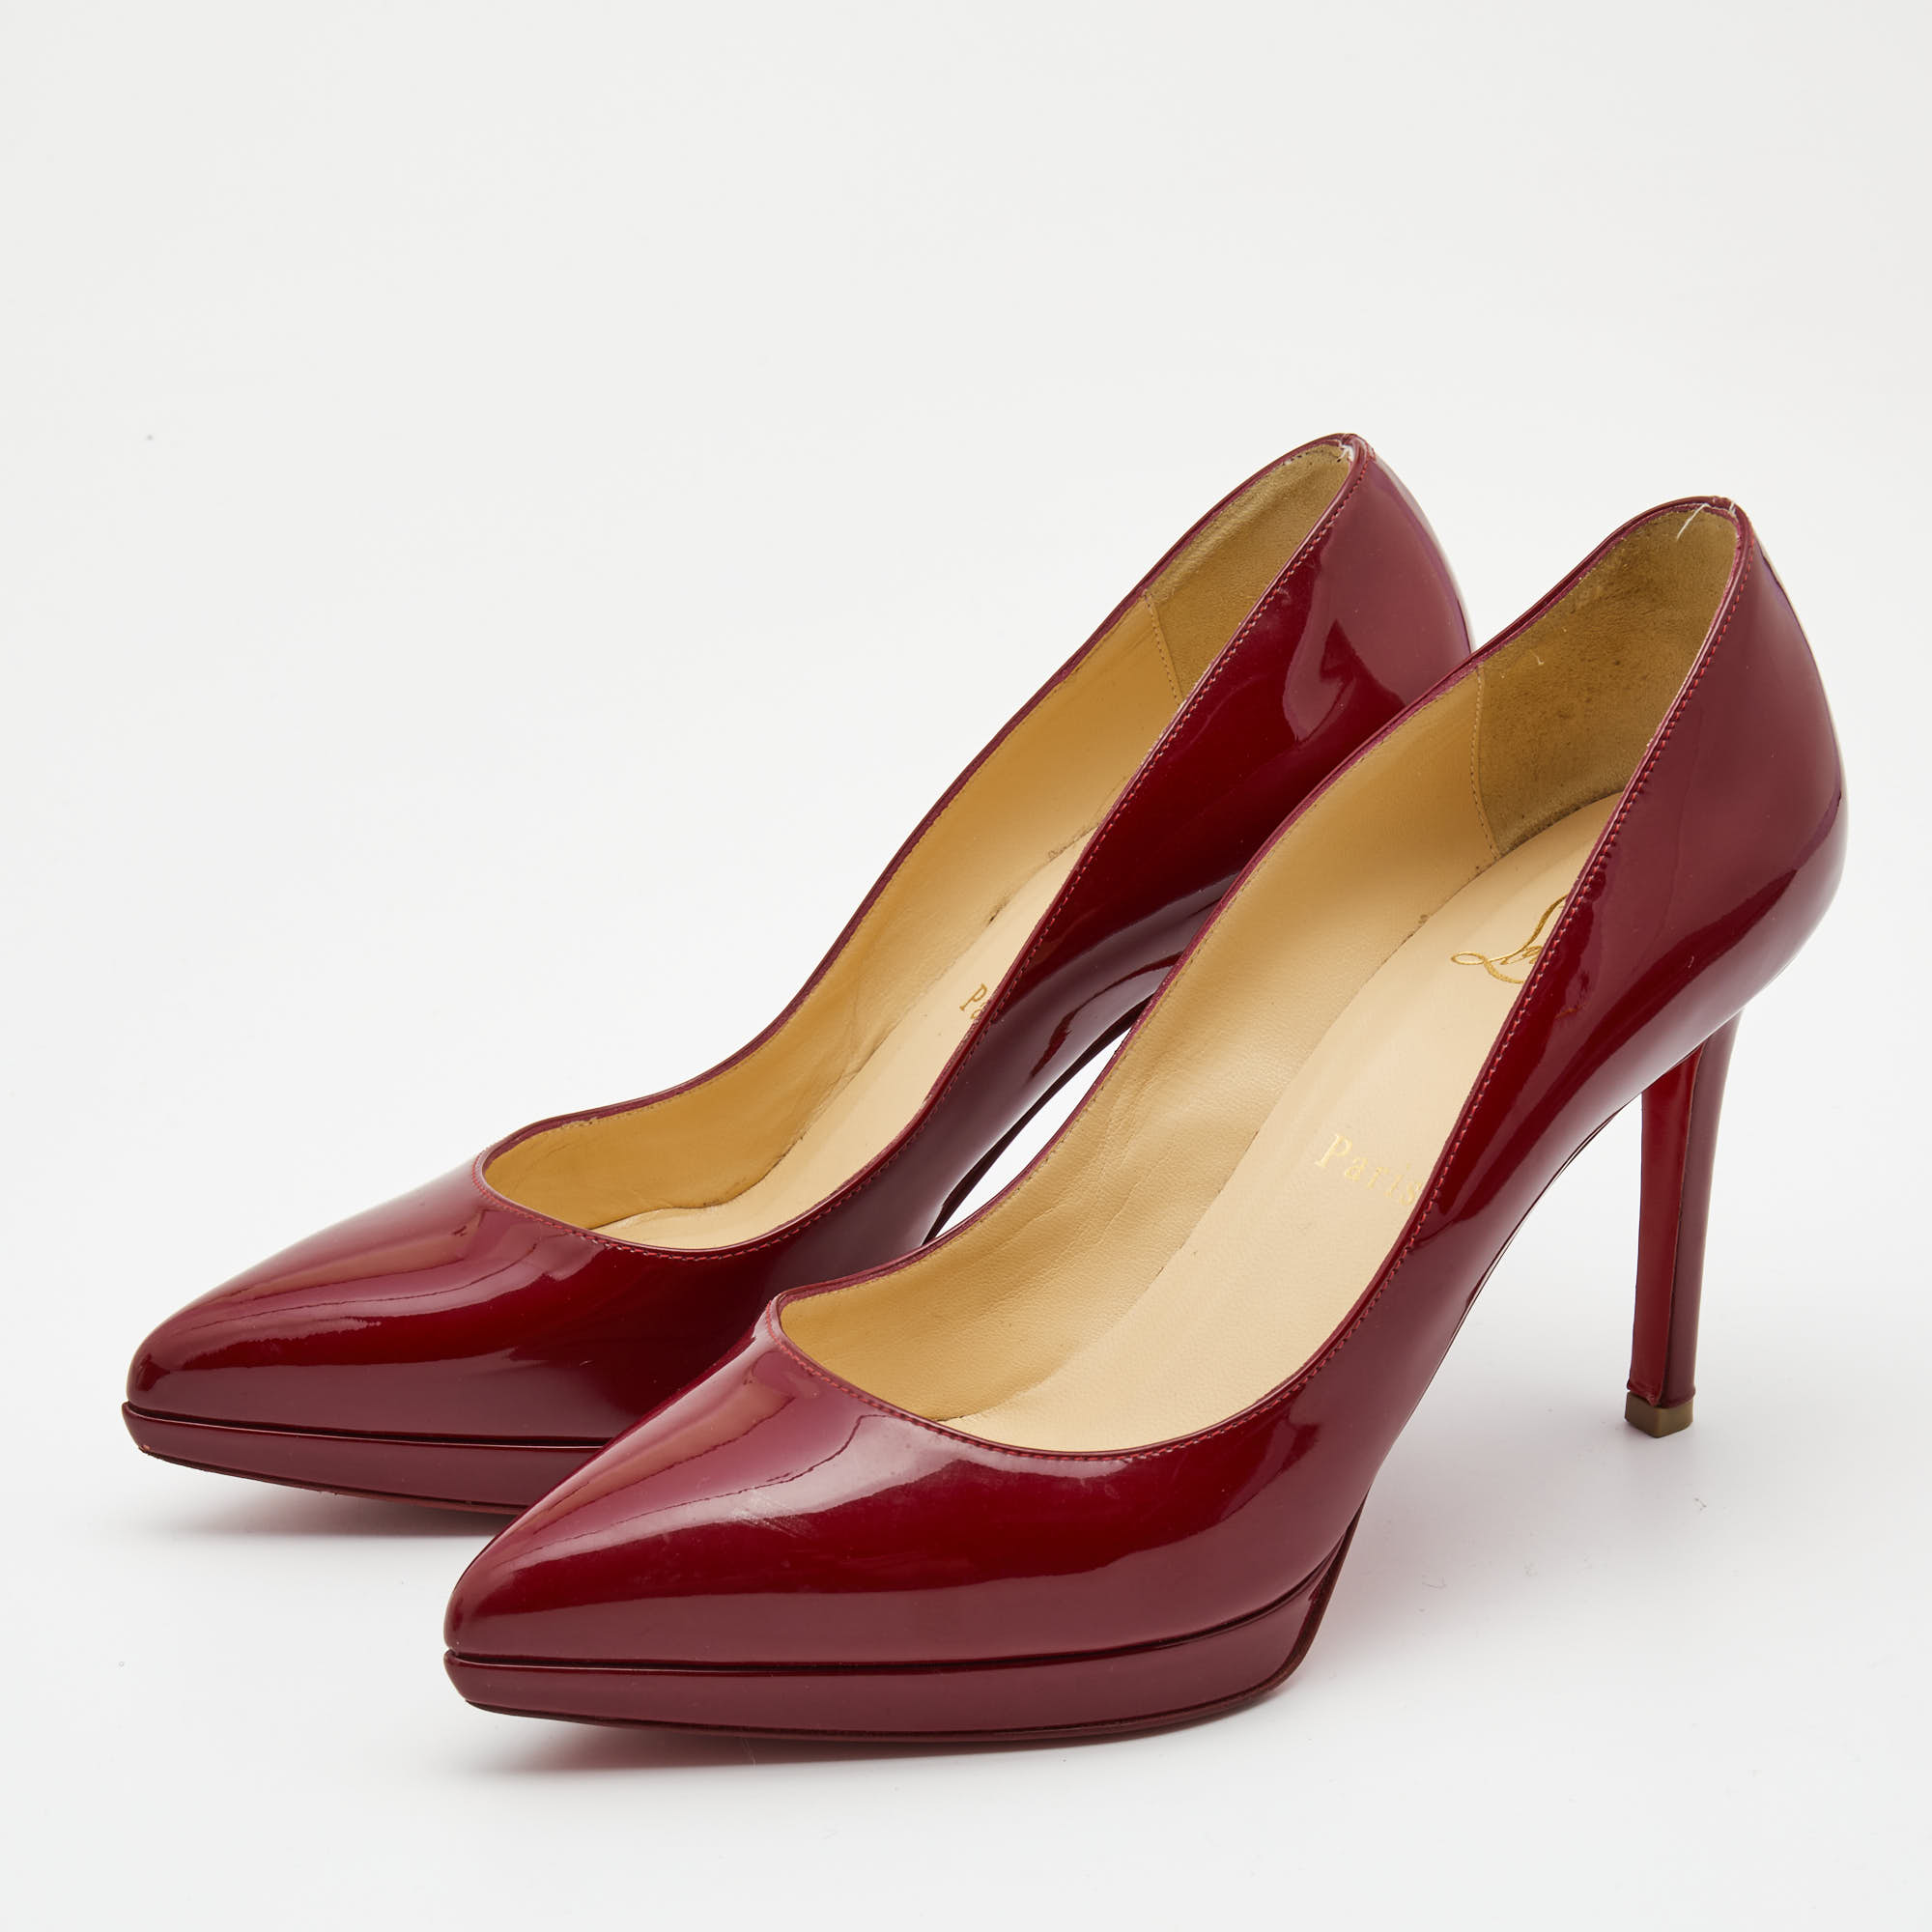 

Christian Louboutin Burgundy Patent Leather Pigalle Plato Pumps Size